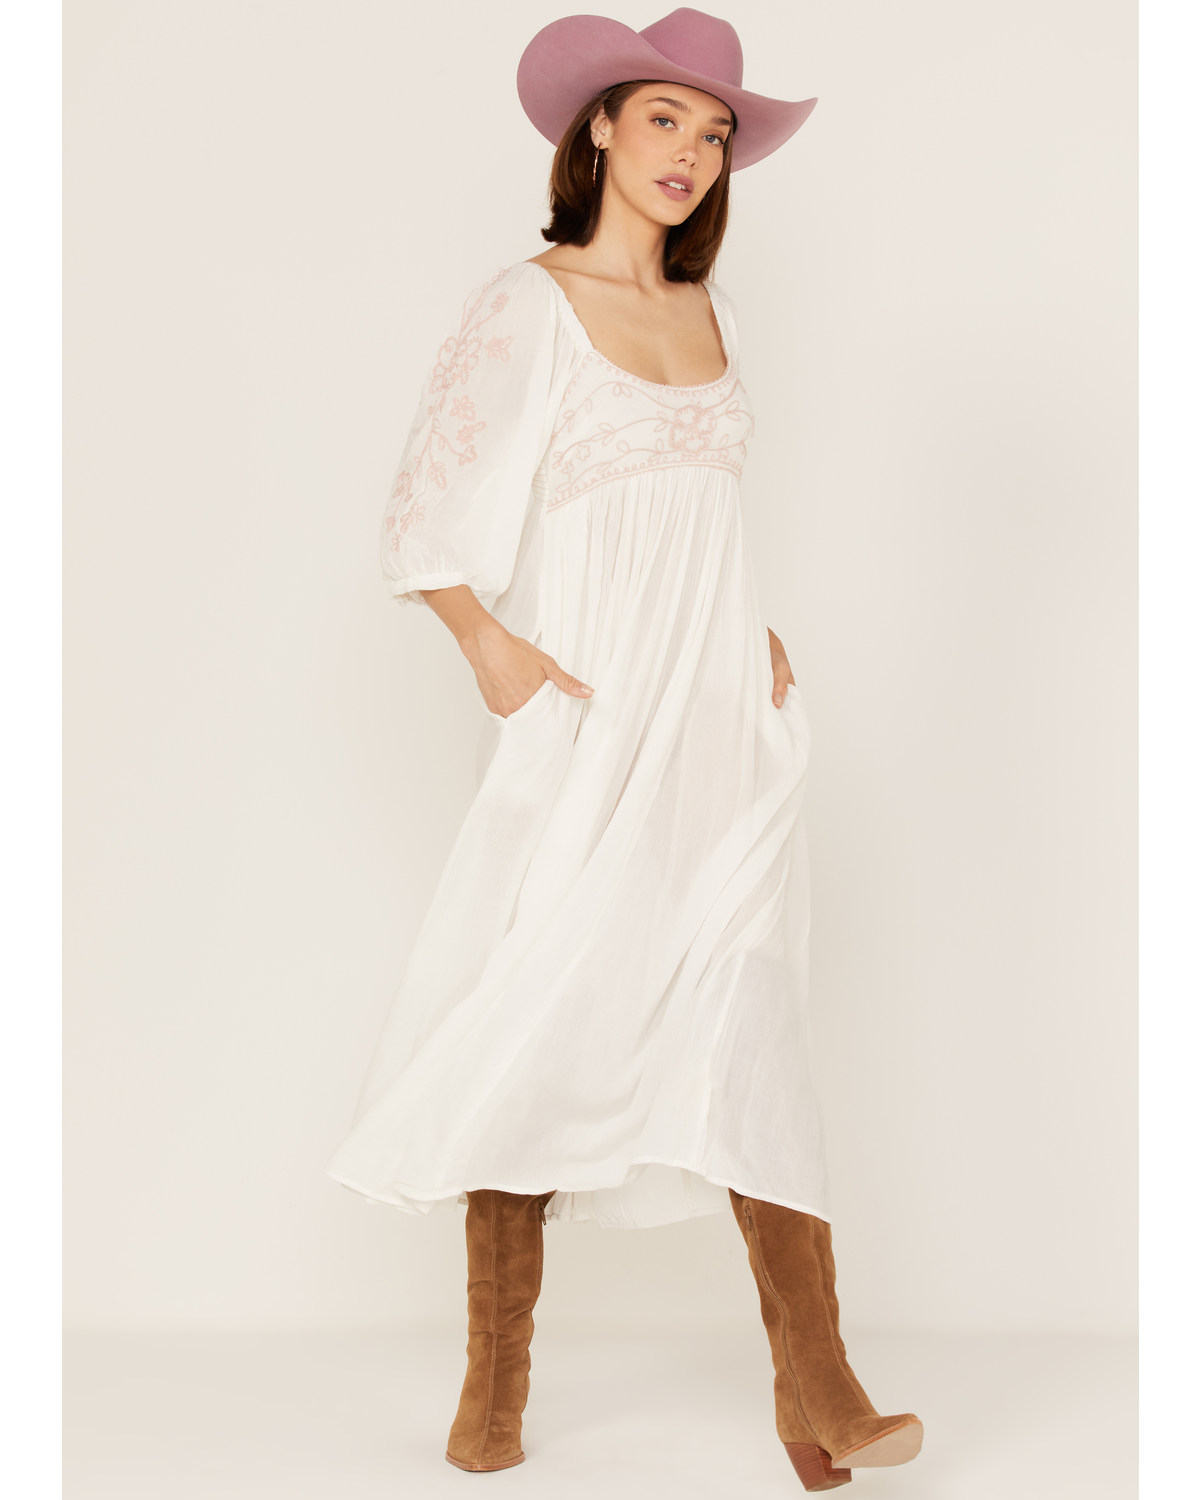 Free People Women's Wedgewood Embroidered Long Puff Sleeve Midi Dress